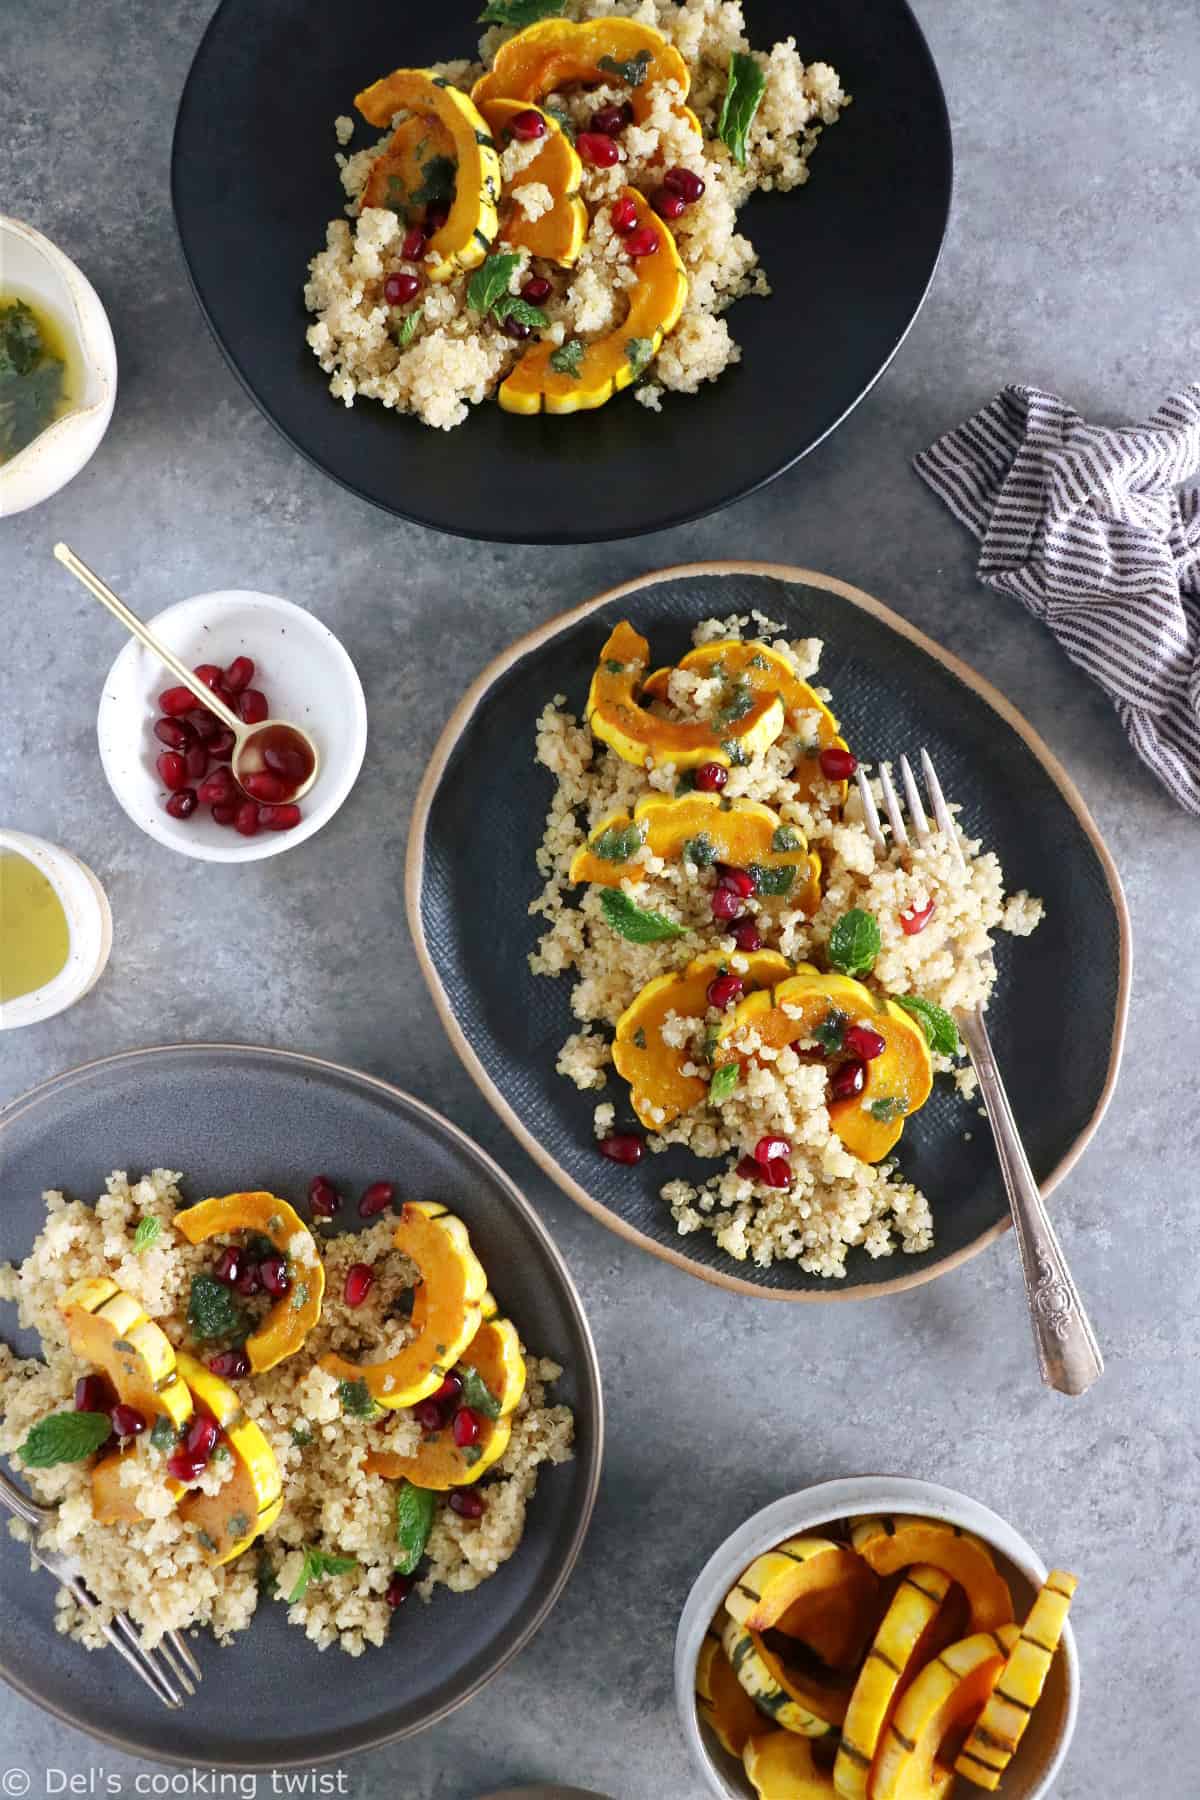 Feed your soul with a nourishing quinoa bowl featuring roasted delicata squash and a mint pesto.